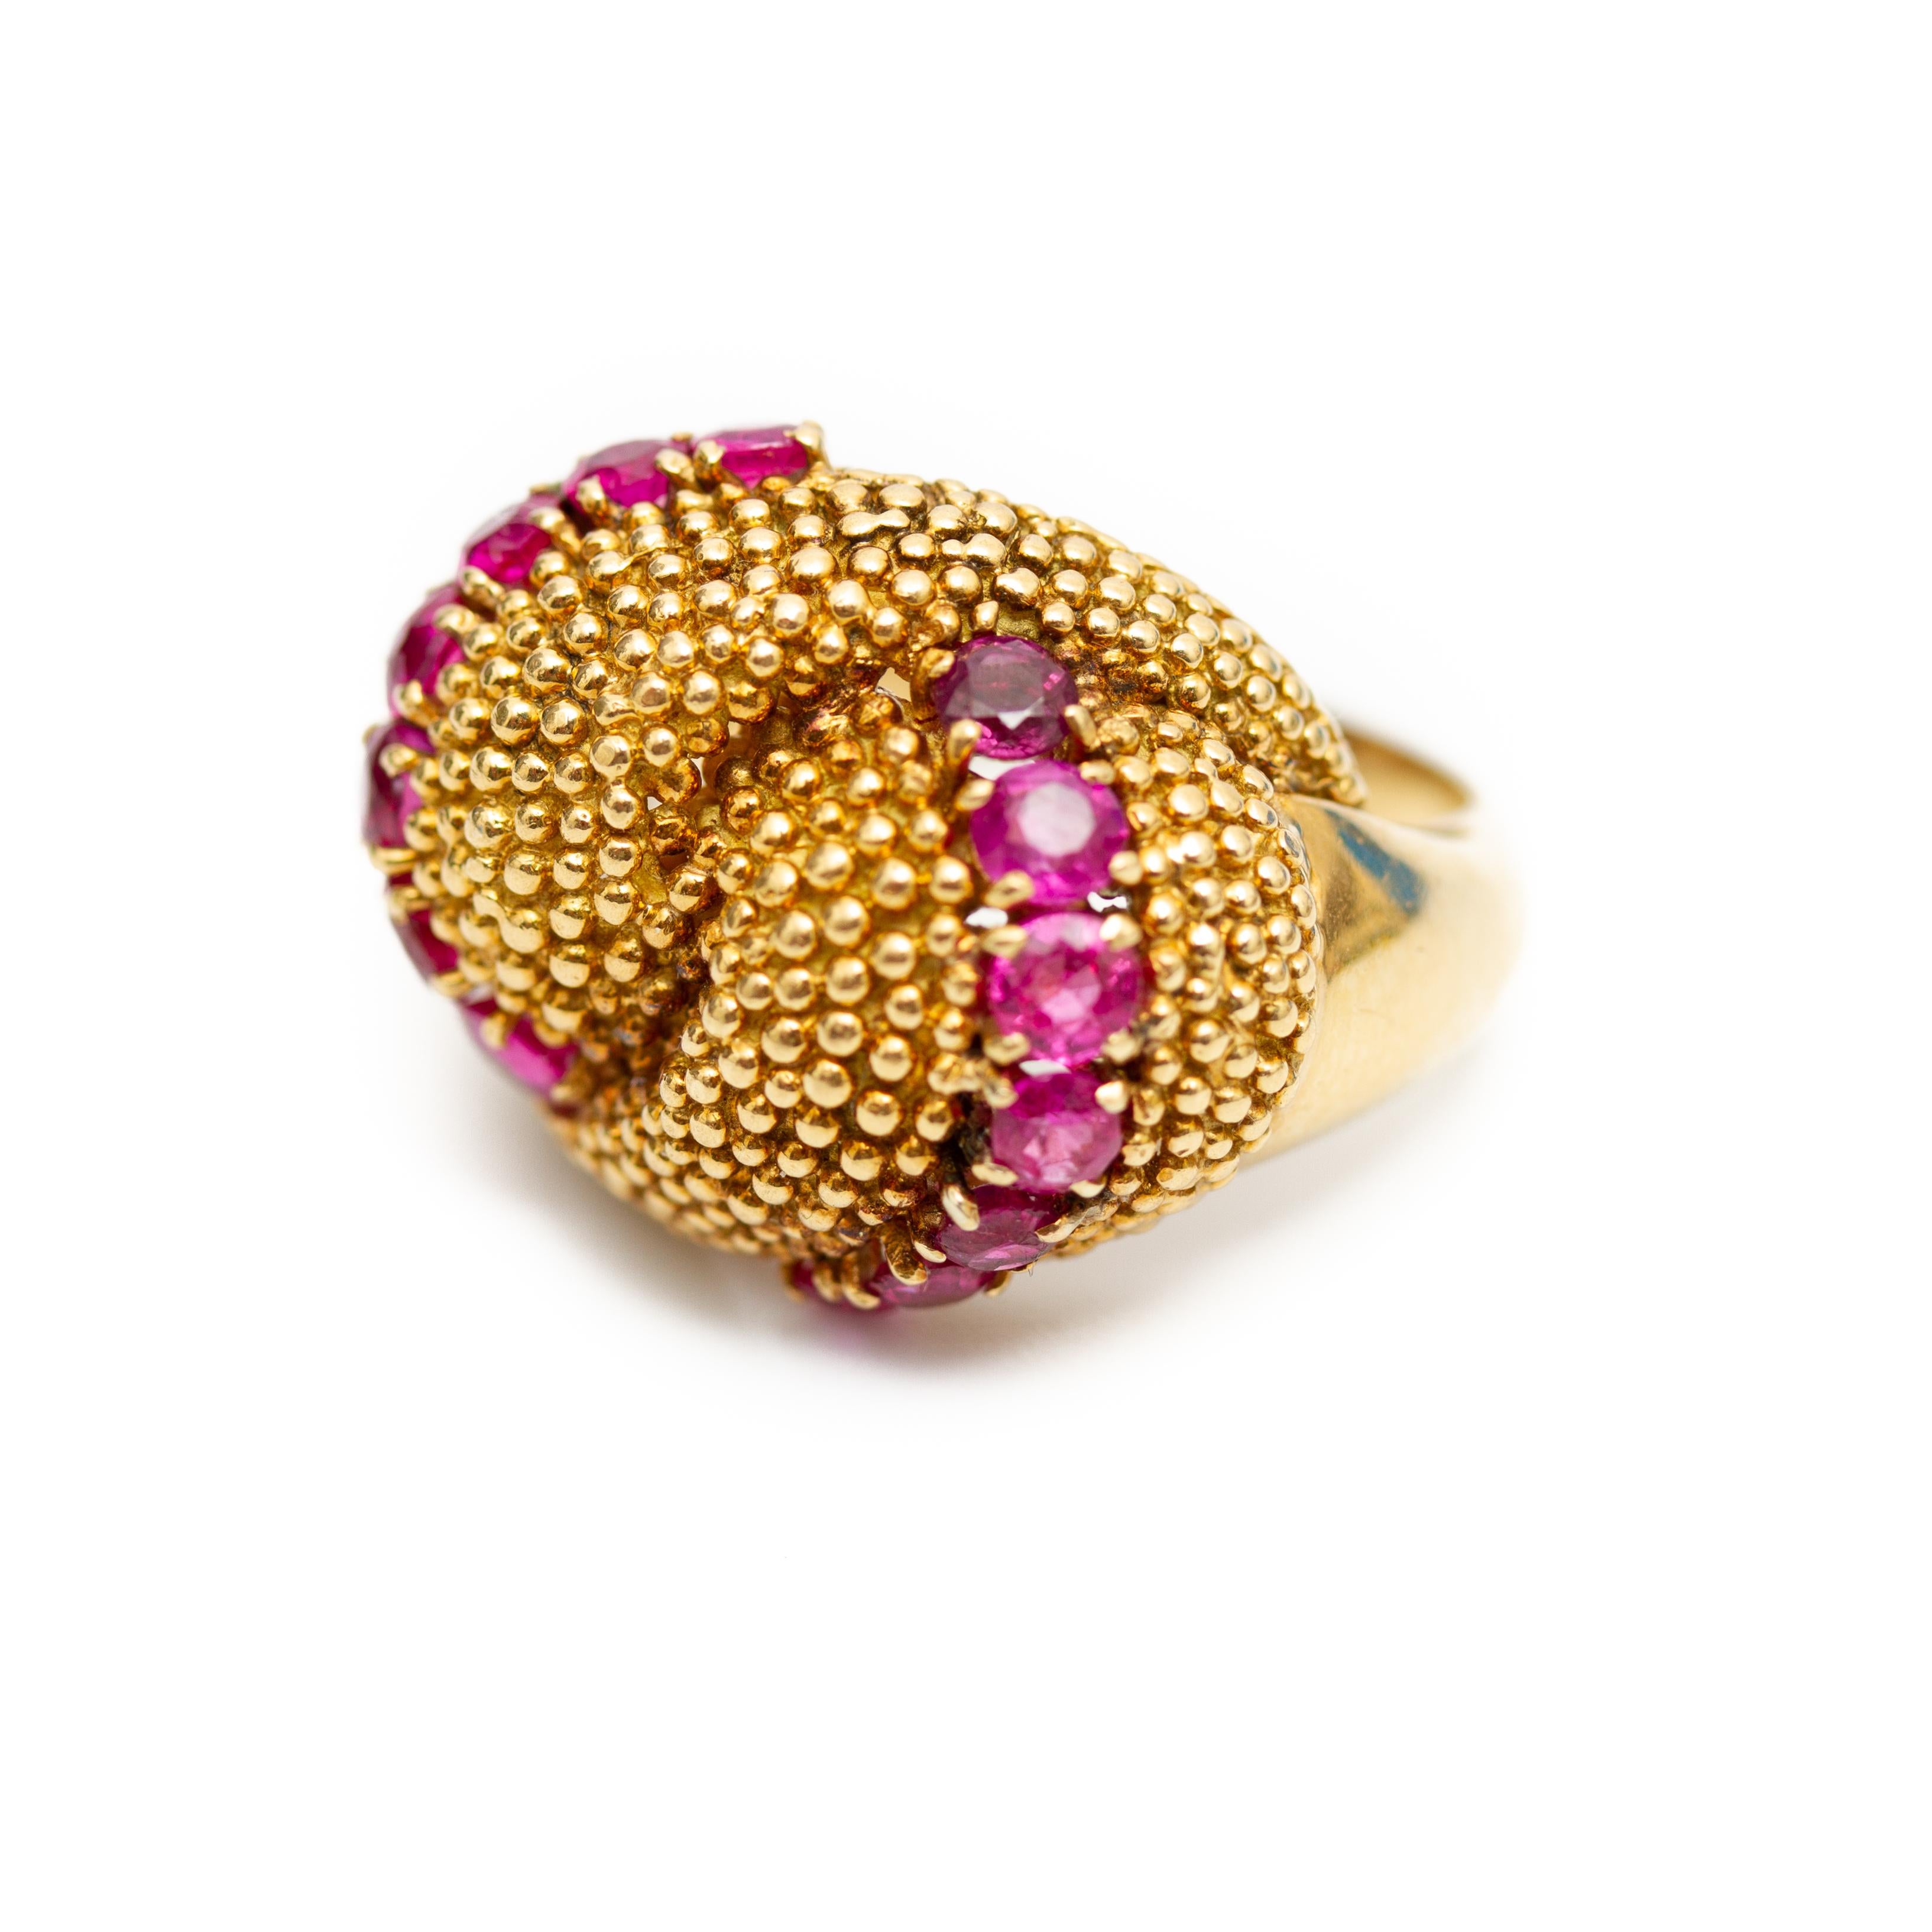 Offered is an 18K yellow gold ruby domed ring made in Italy. This oblong domed ring features curved rows of round rubies amid a beaded interlocking surface.